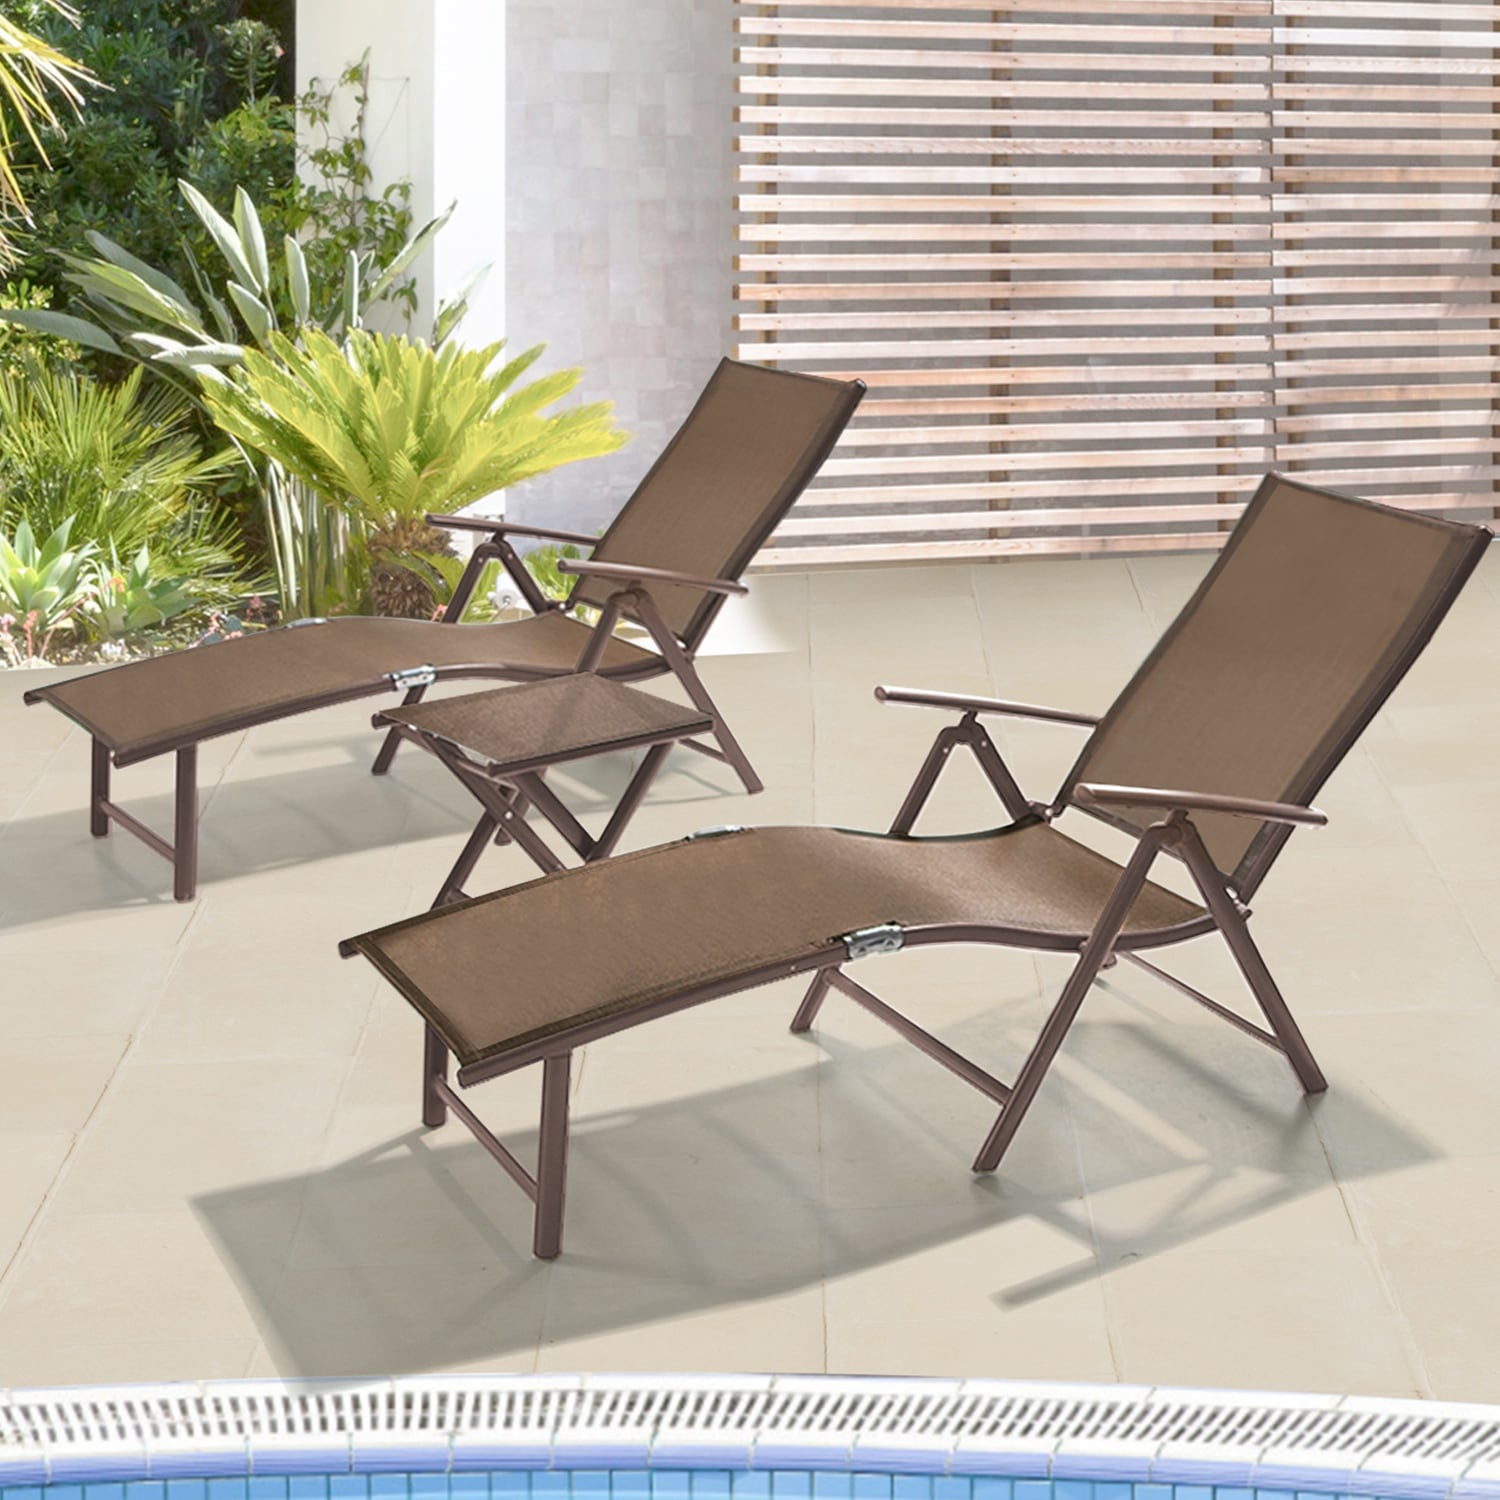 Vredhom Outdoor Portable Folding Chaise Lounge Chair With Table (set Of 3) - 70 L X 20 W X 14 H